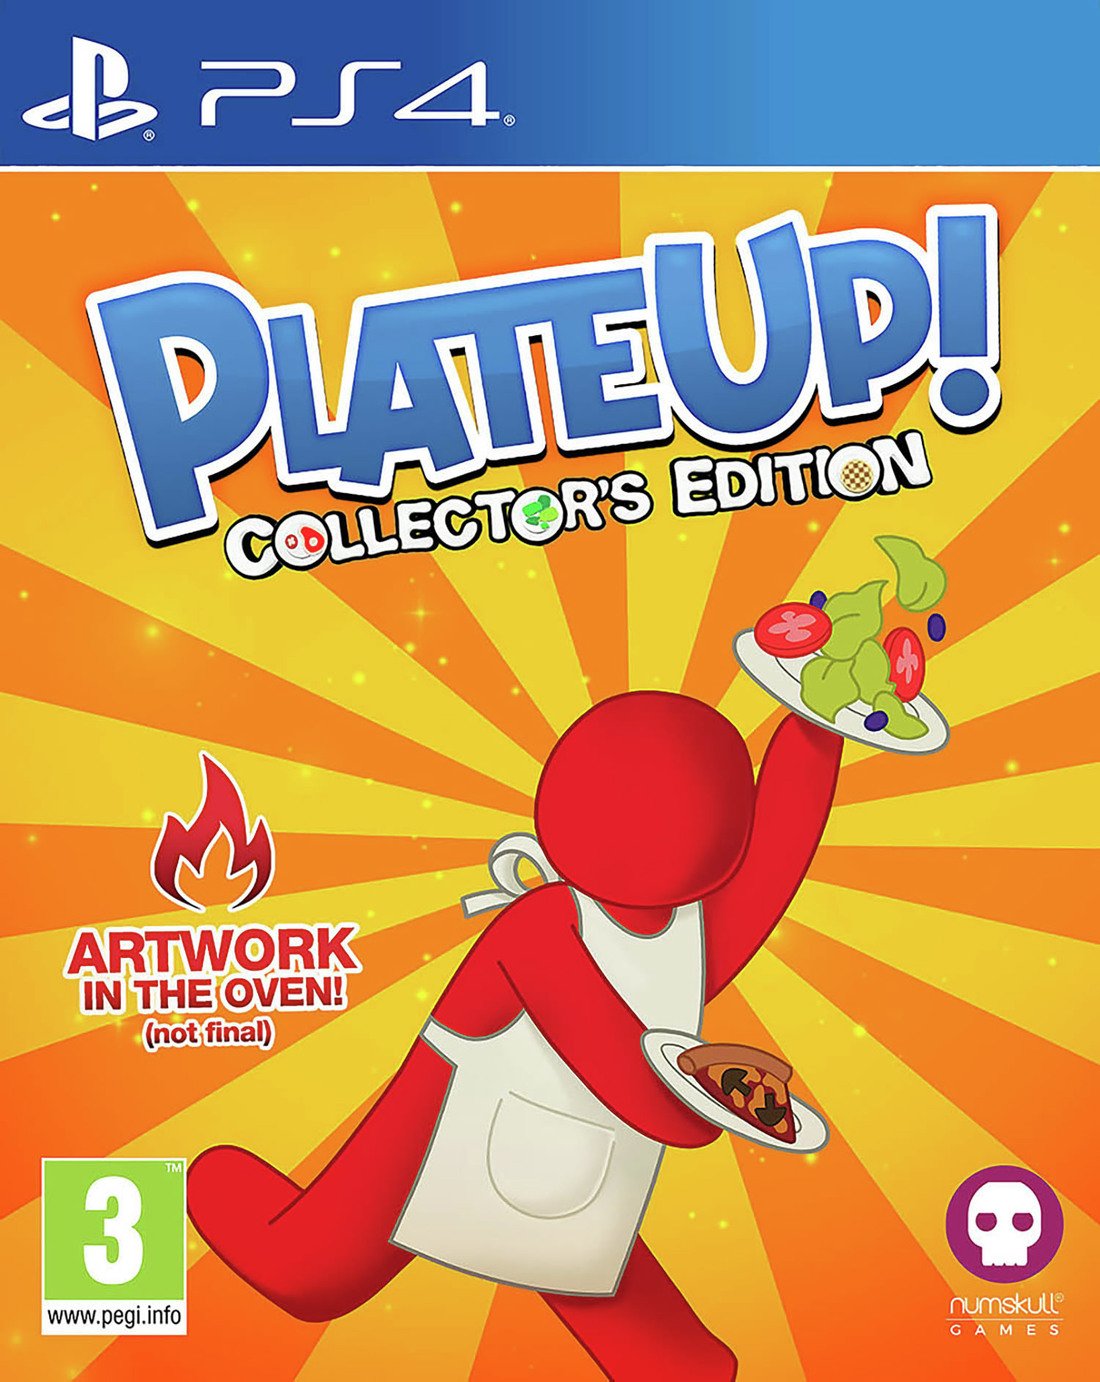 PlateUp! Collector's Edition PS4 Game